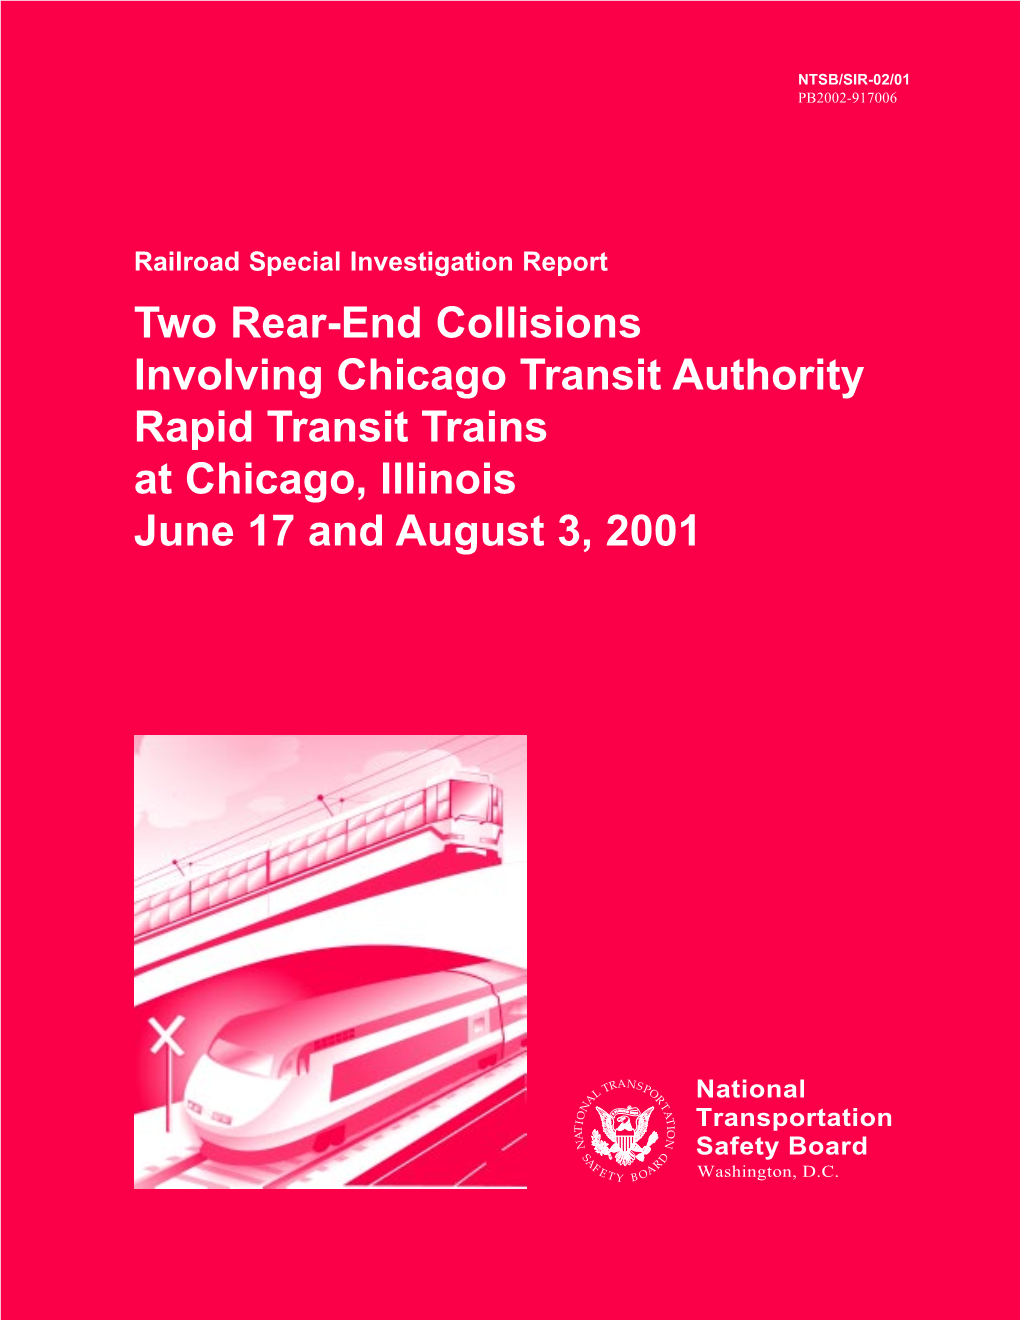 Two Rear-End Collisions Involving Chicago Transit Authority Rapid Transit Trains at Chicago, Illinois June 17 and August 3, 2001